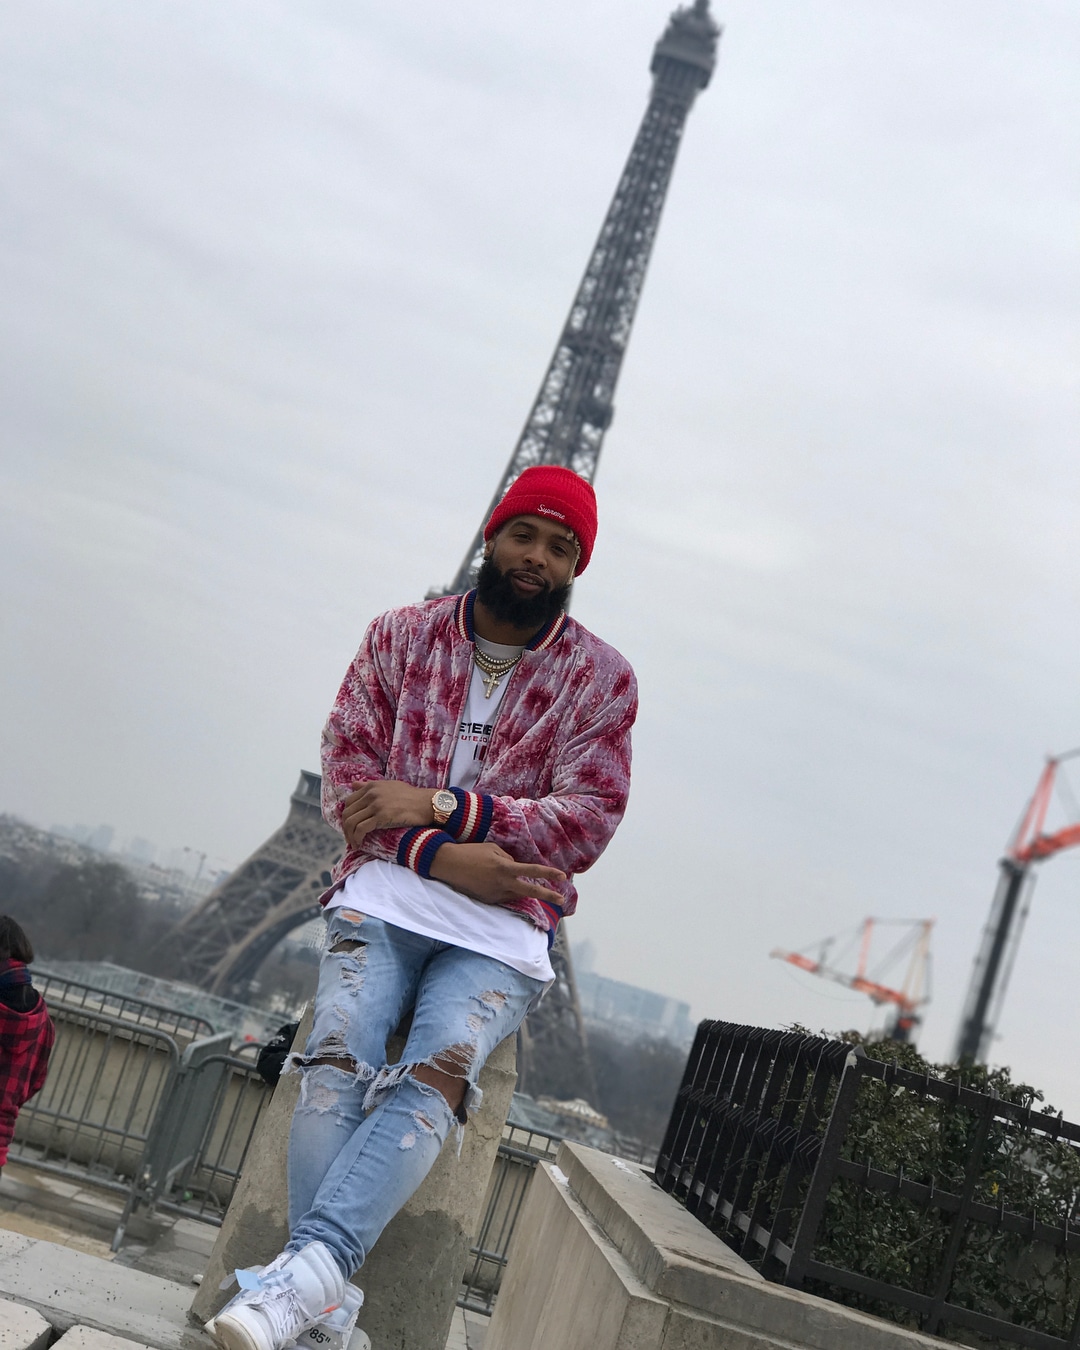 Odell Beckham Decked Out In $7,000 Louis Vuitton Fit At Paris Fashion Week